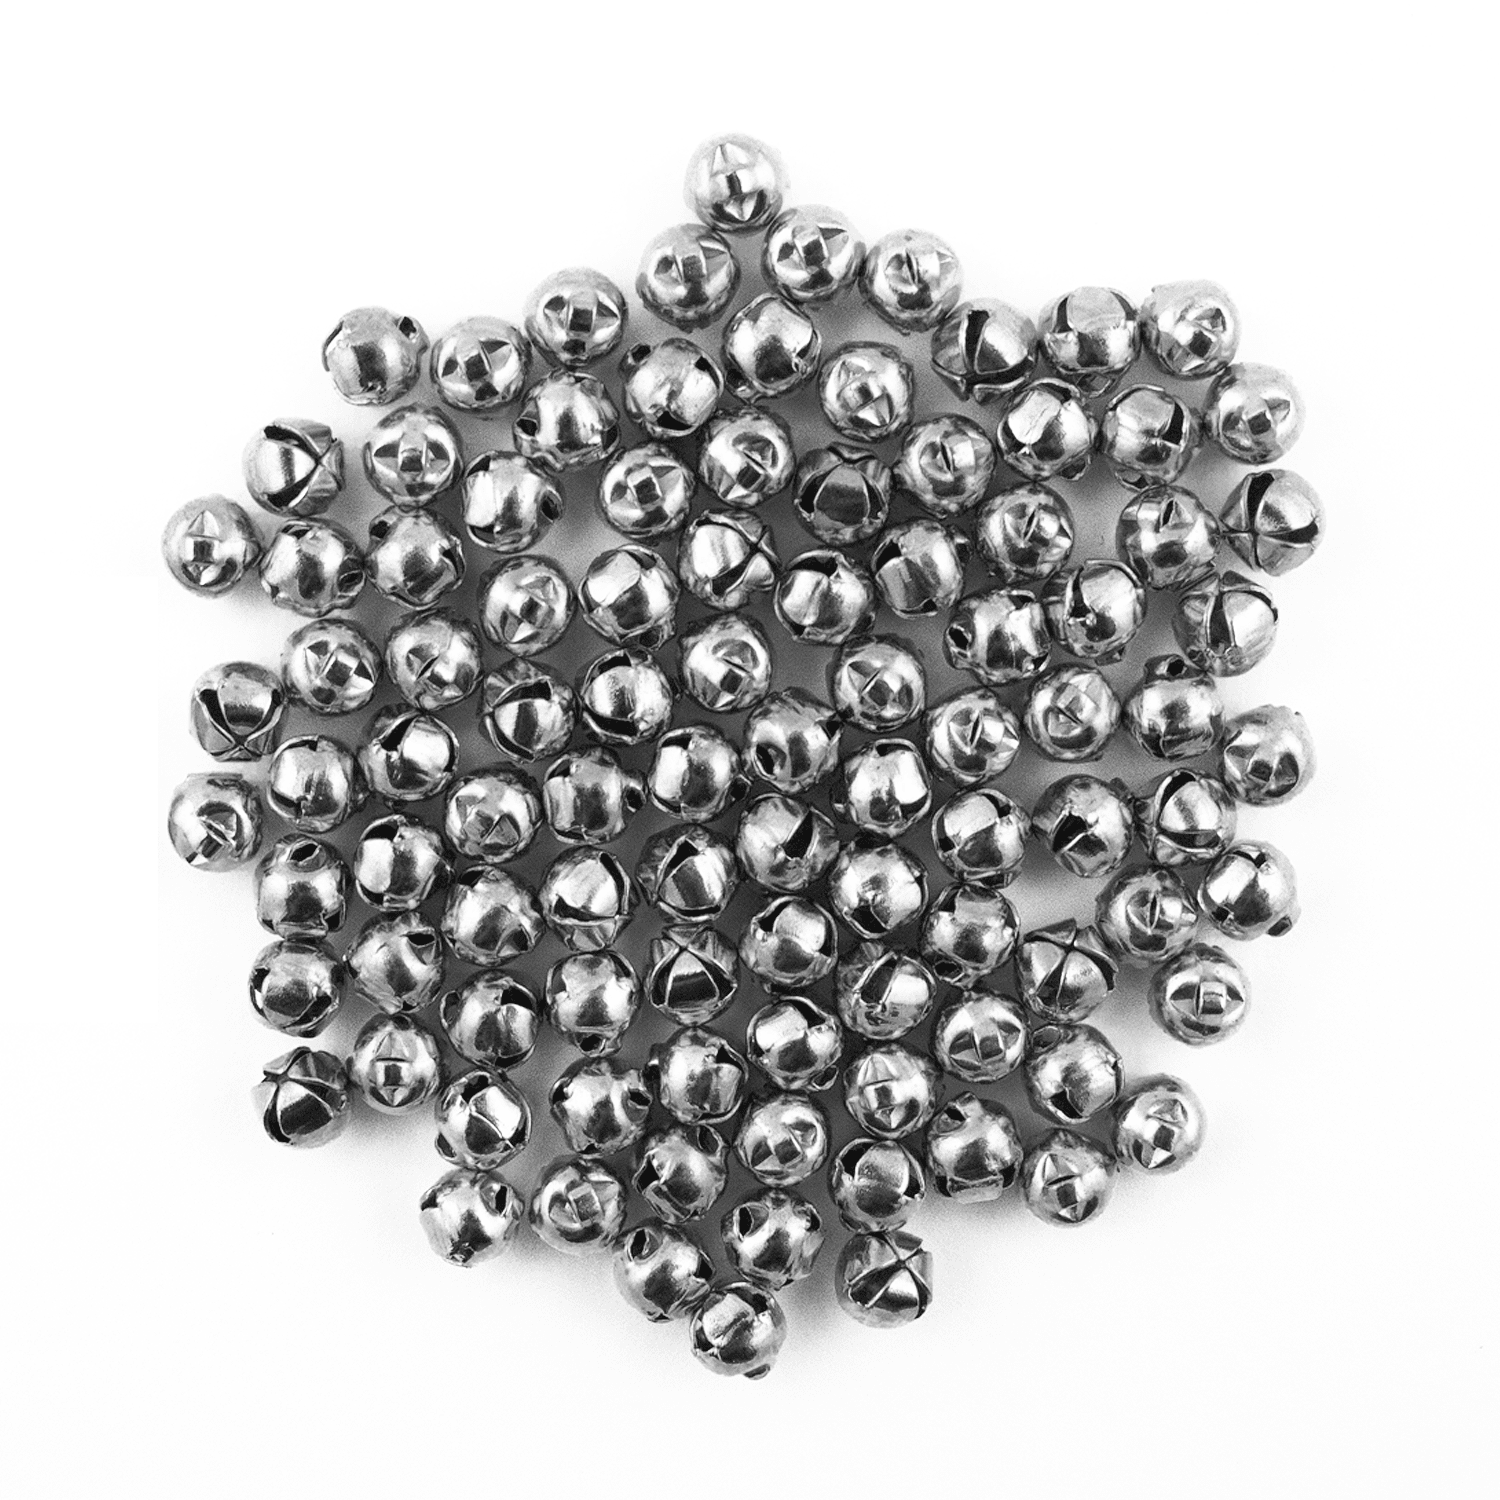 6mm Bronze Jingle Bell/Small Bell/Mini Bell DIY Bracelet Anklets Necklace  Knitting/Jewelry Making,100pcs 1/4-Inch Bronze